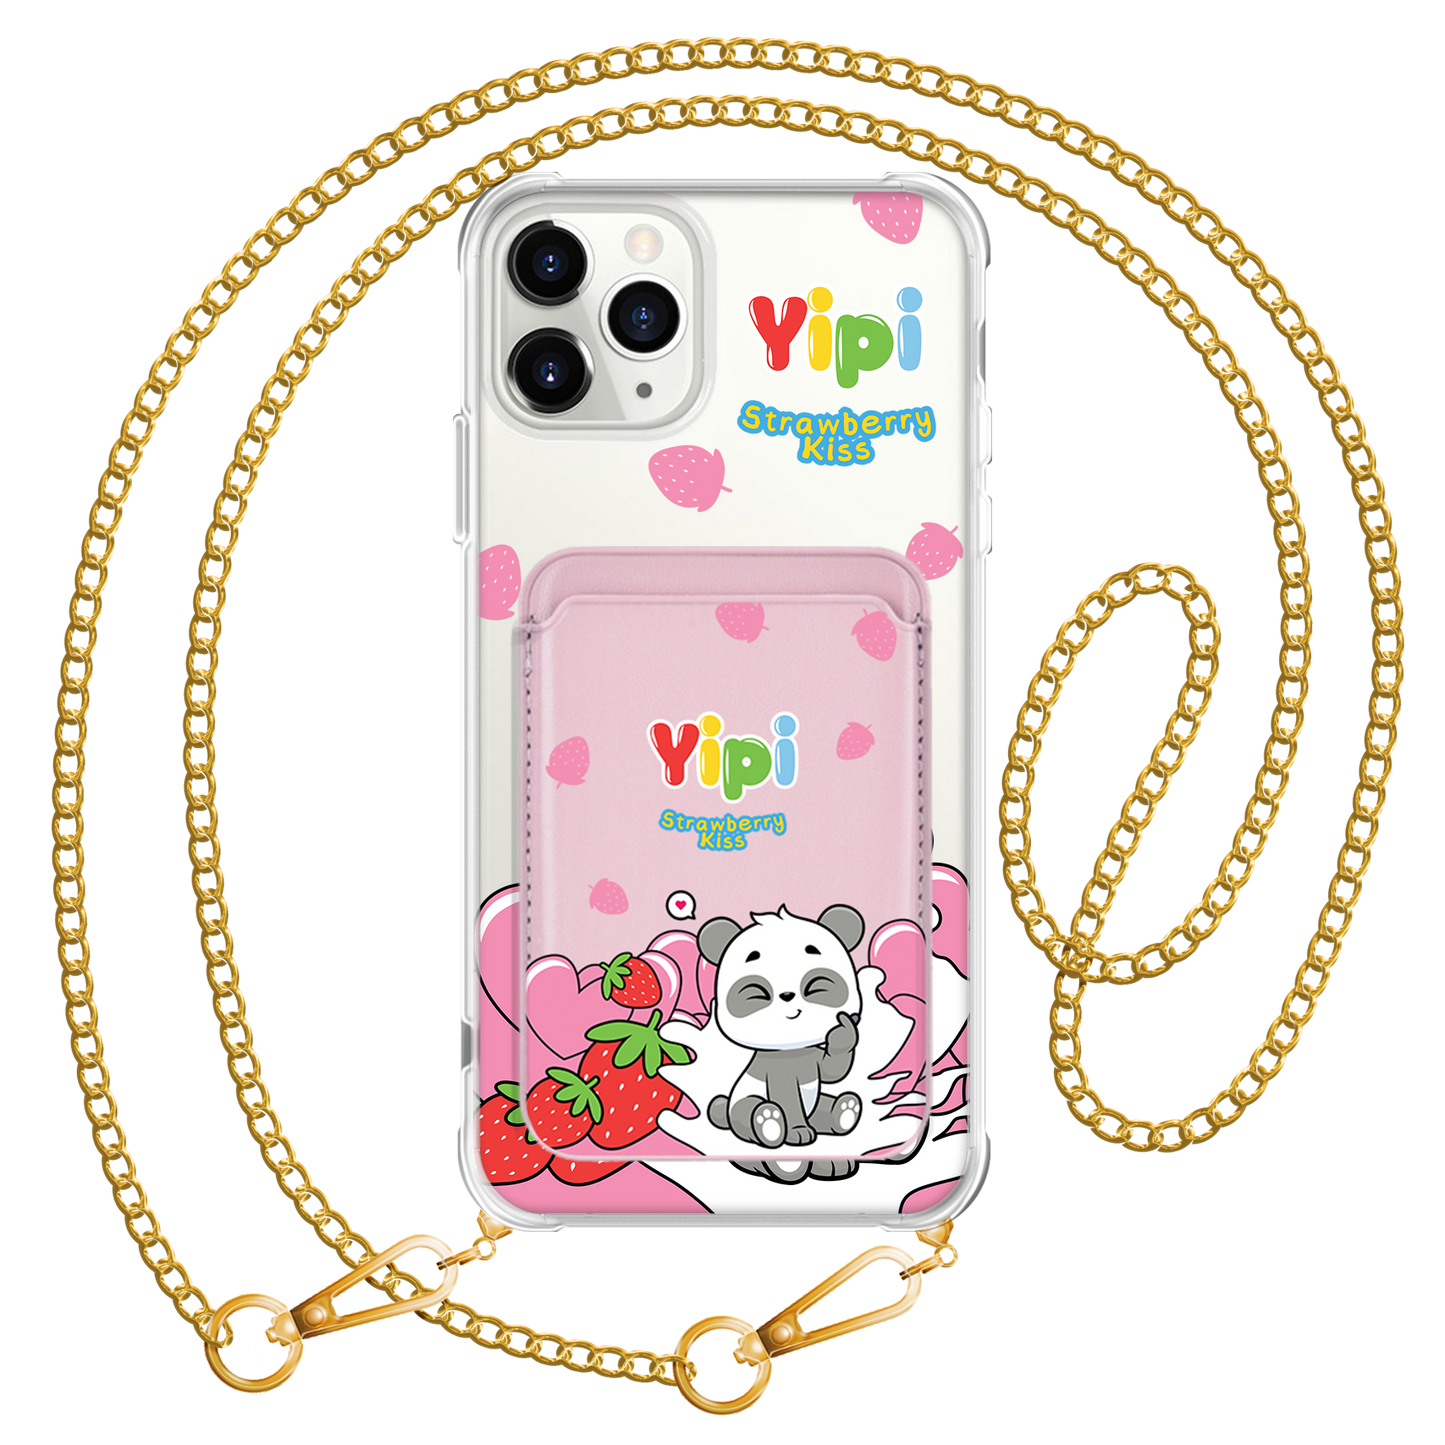 iPhone Magnetic Wallet Case - Yipi Strawberry Kiss